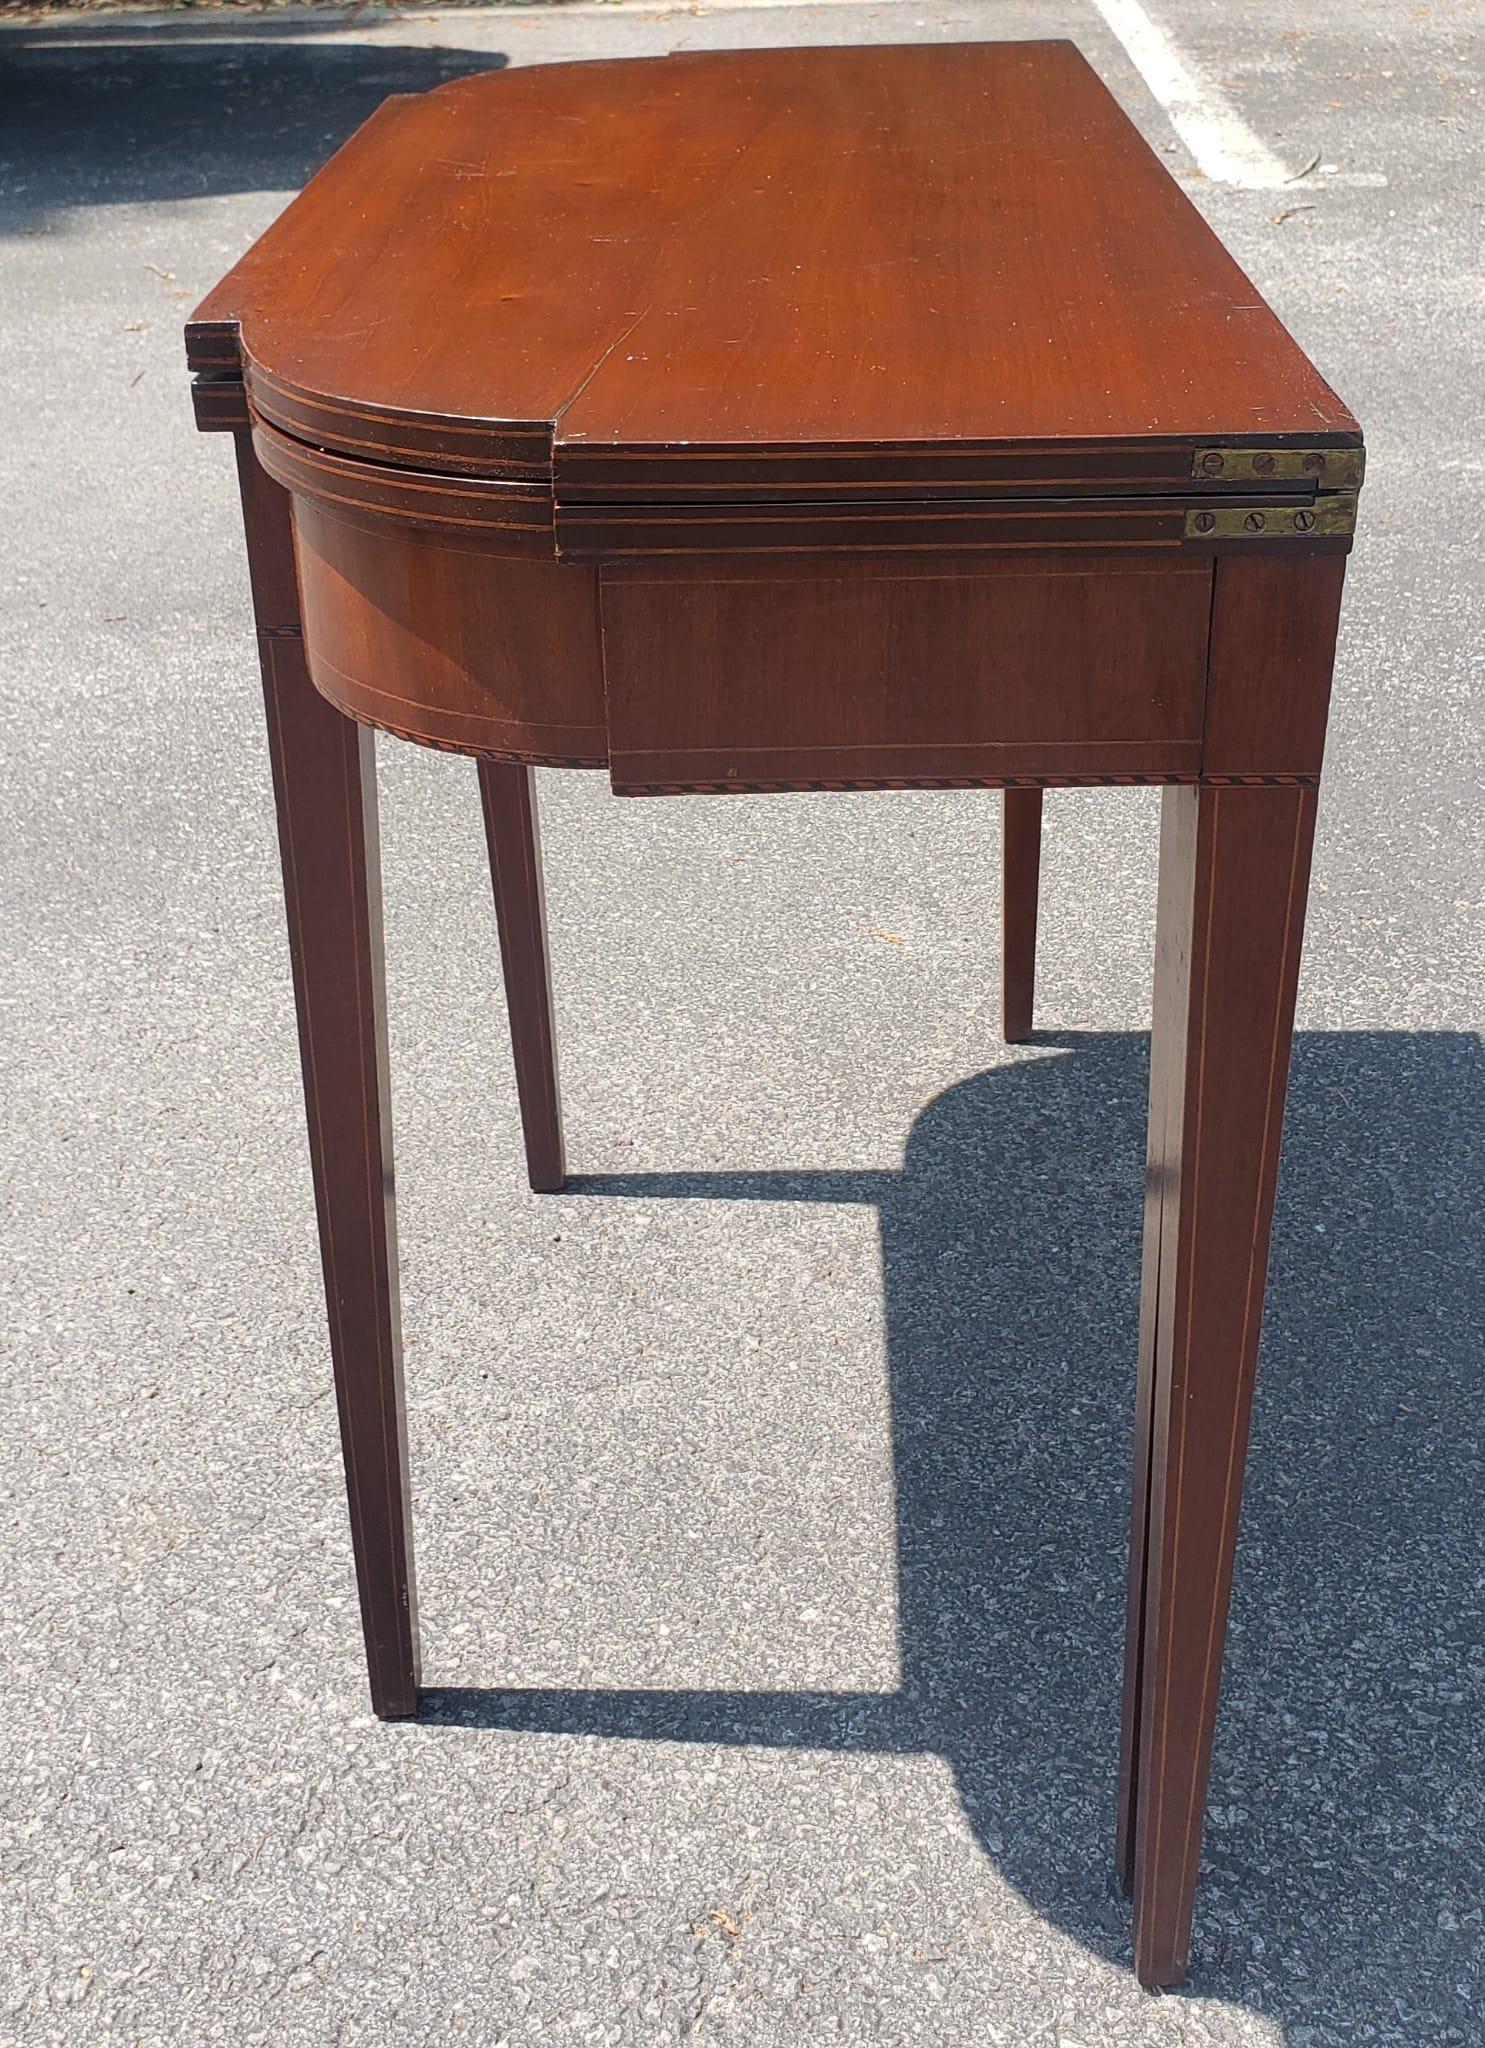 20th Century Federal Style Inlaid Mahogany Fold-Top Console Table, Circa 1920s For Sale